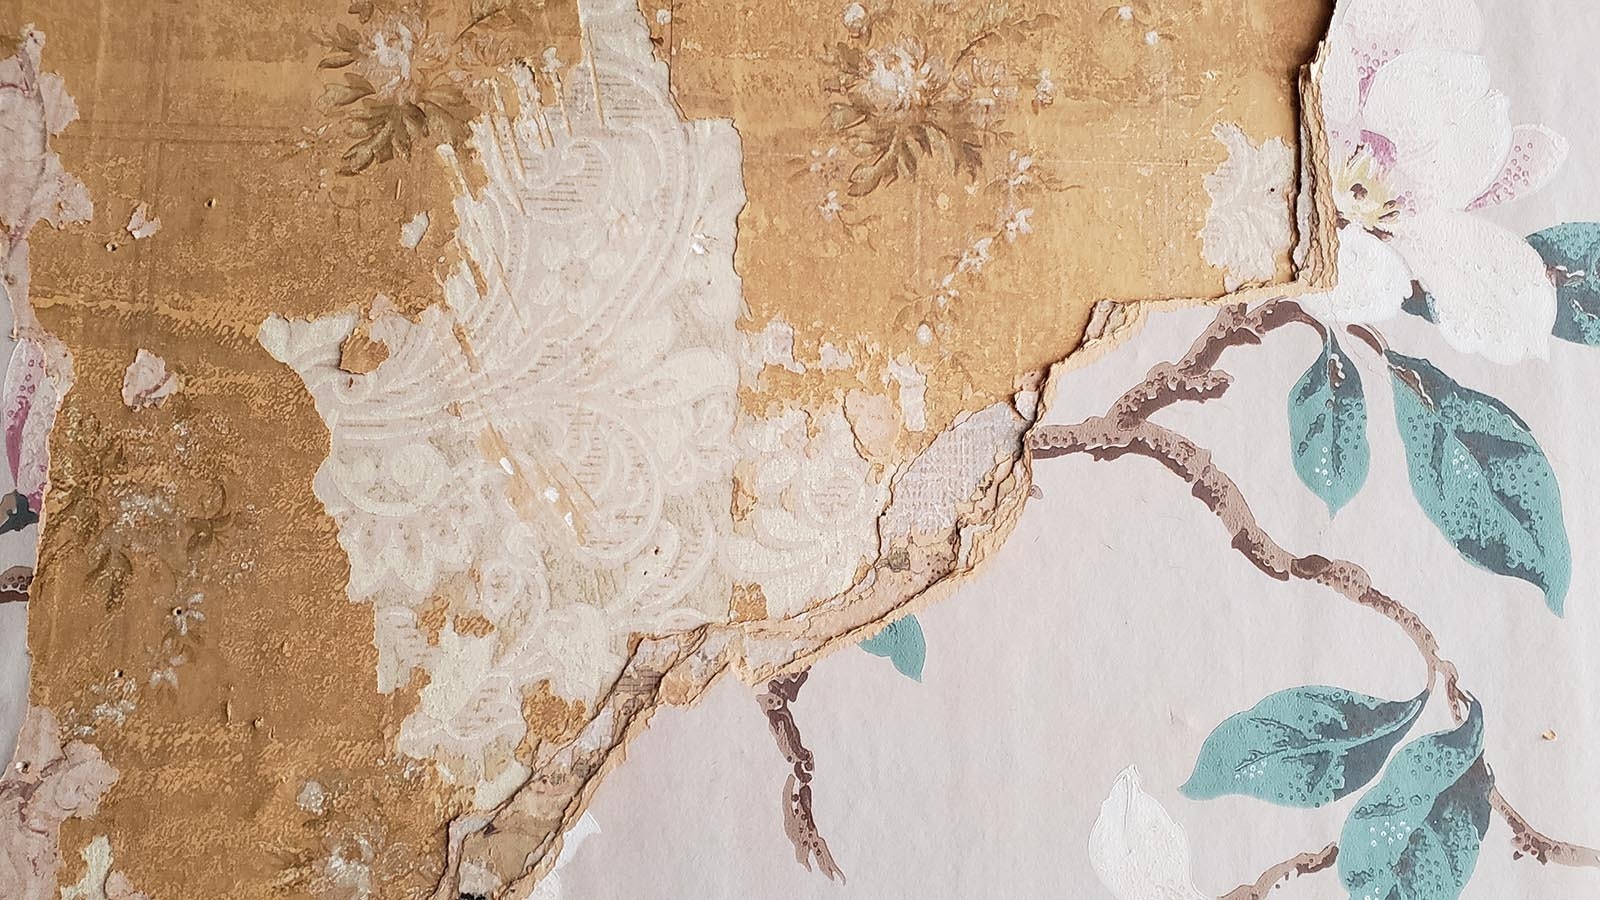 The Atlas Theatre's upper floors have at least nine layers of wallpaper.